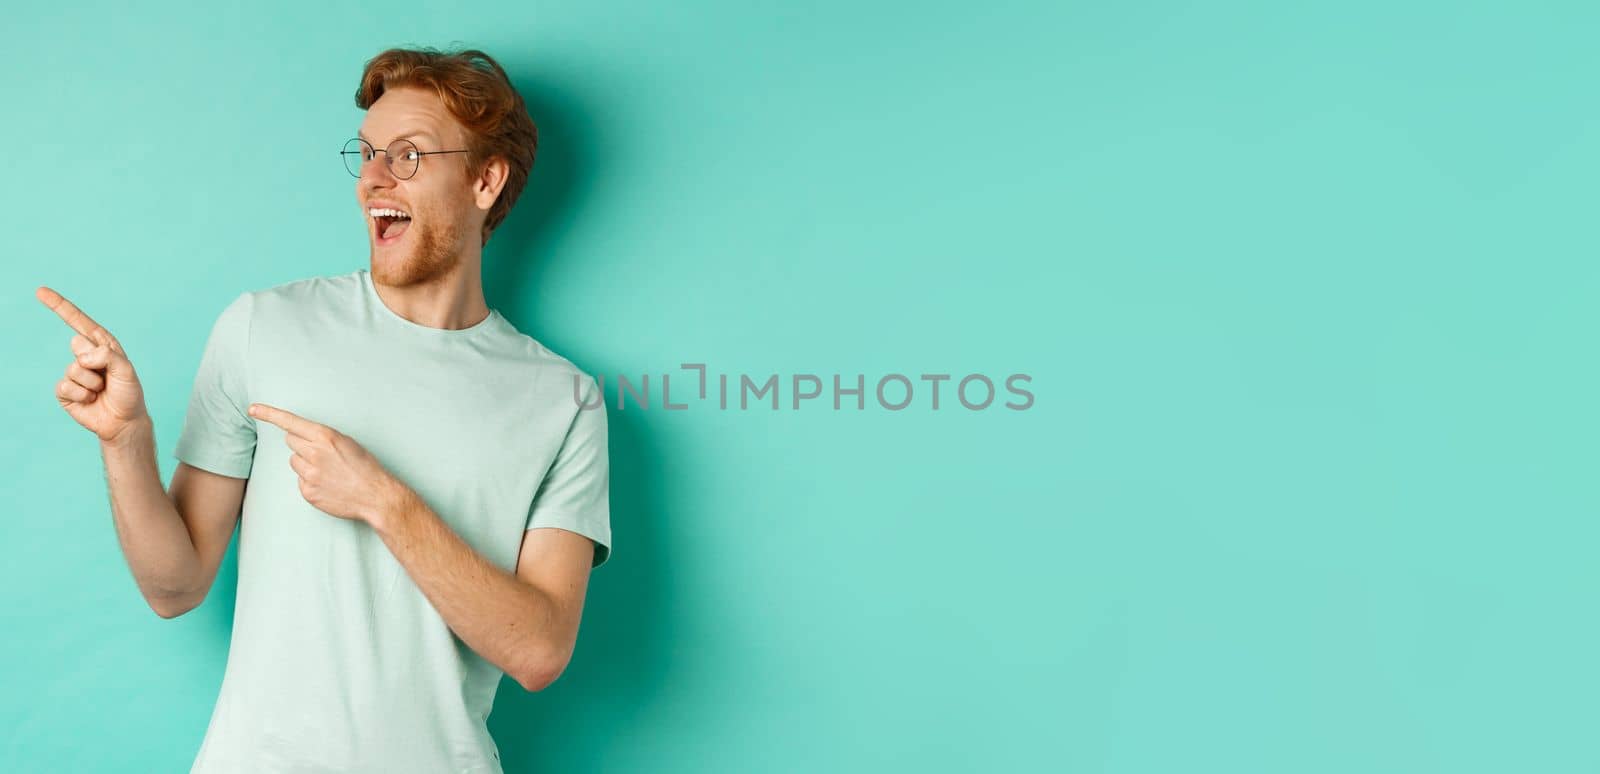 Excited young man with red hair, wearing glasses and t-shirt, pointing and looking left at awesome promotion, smiling happy at banner, turquoise background.